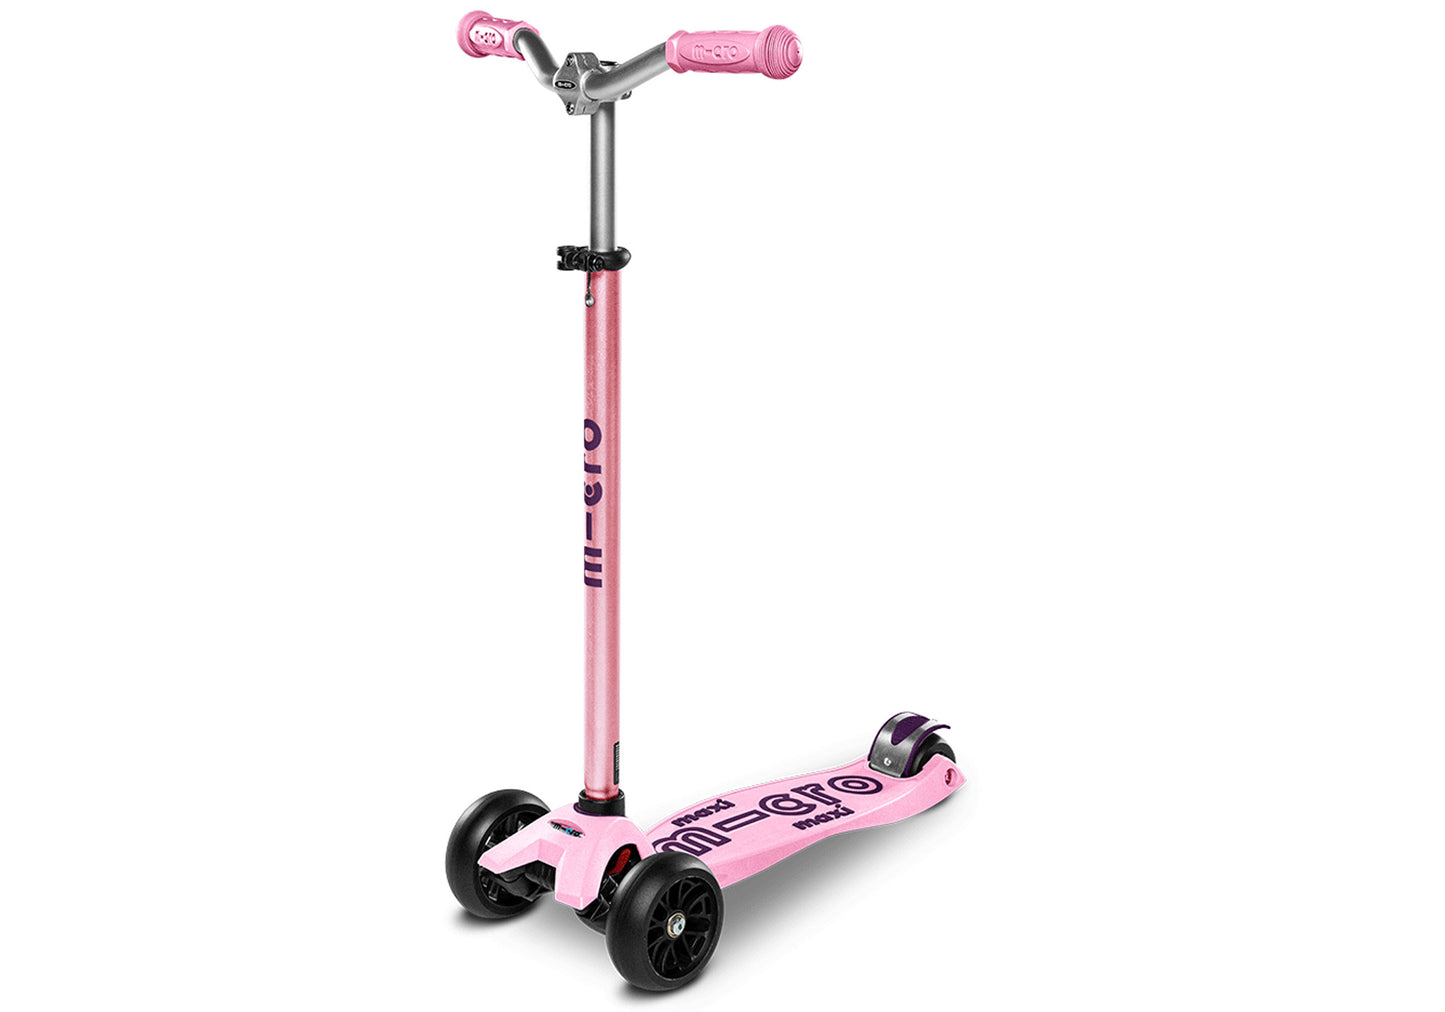 Micro Maxi Micro Deluxe Pro Scooter, Rose buy now at Woolys Wheels Sydney